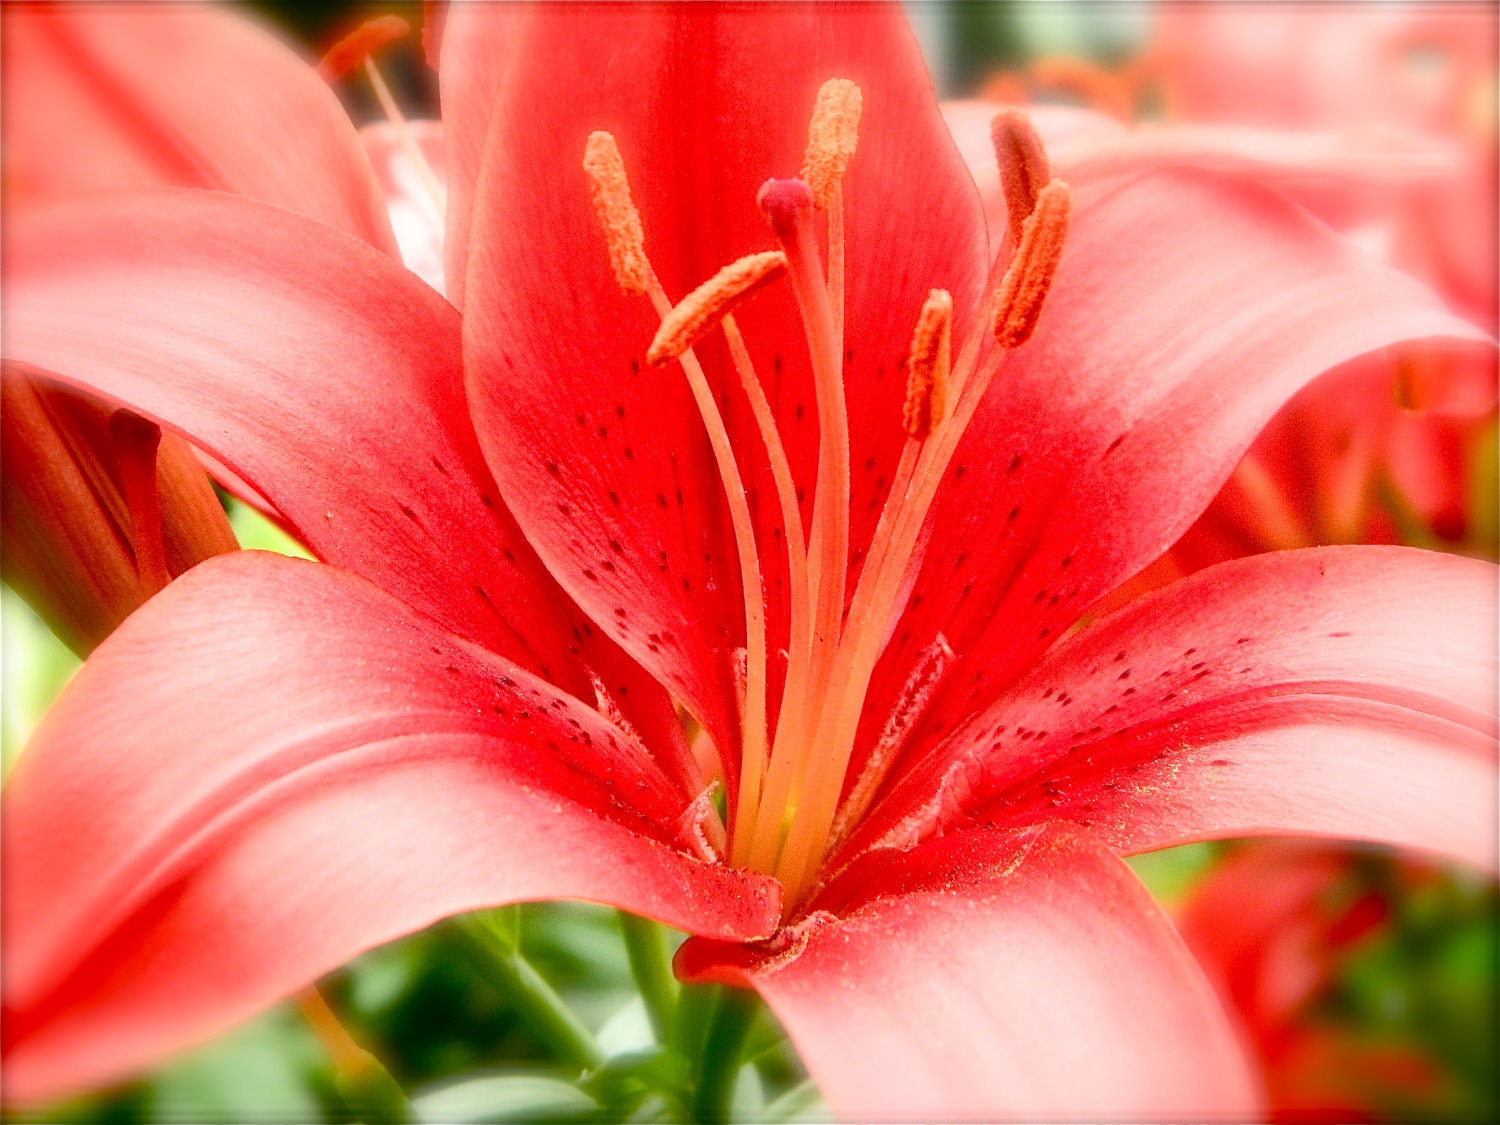 Bright Orange/Red Lily Photgraphy, Nature 8x10, Print, Home Decor, by Abby Smith